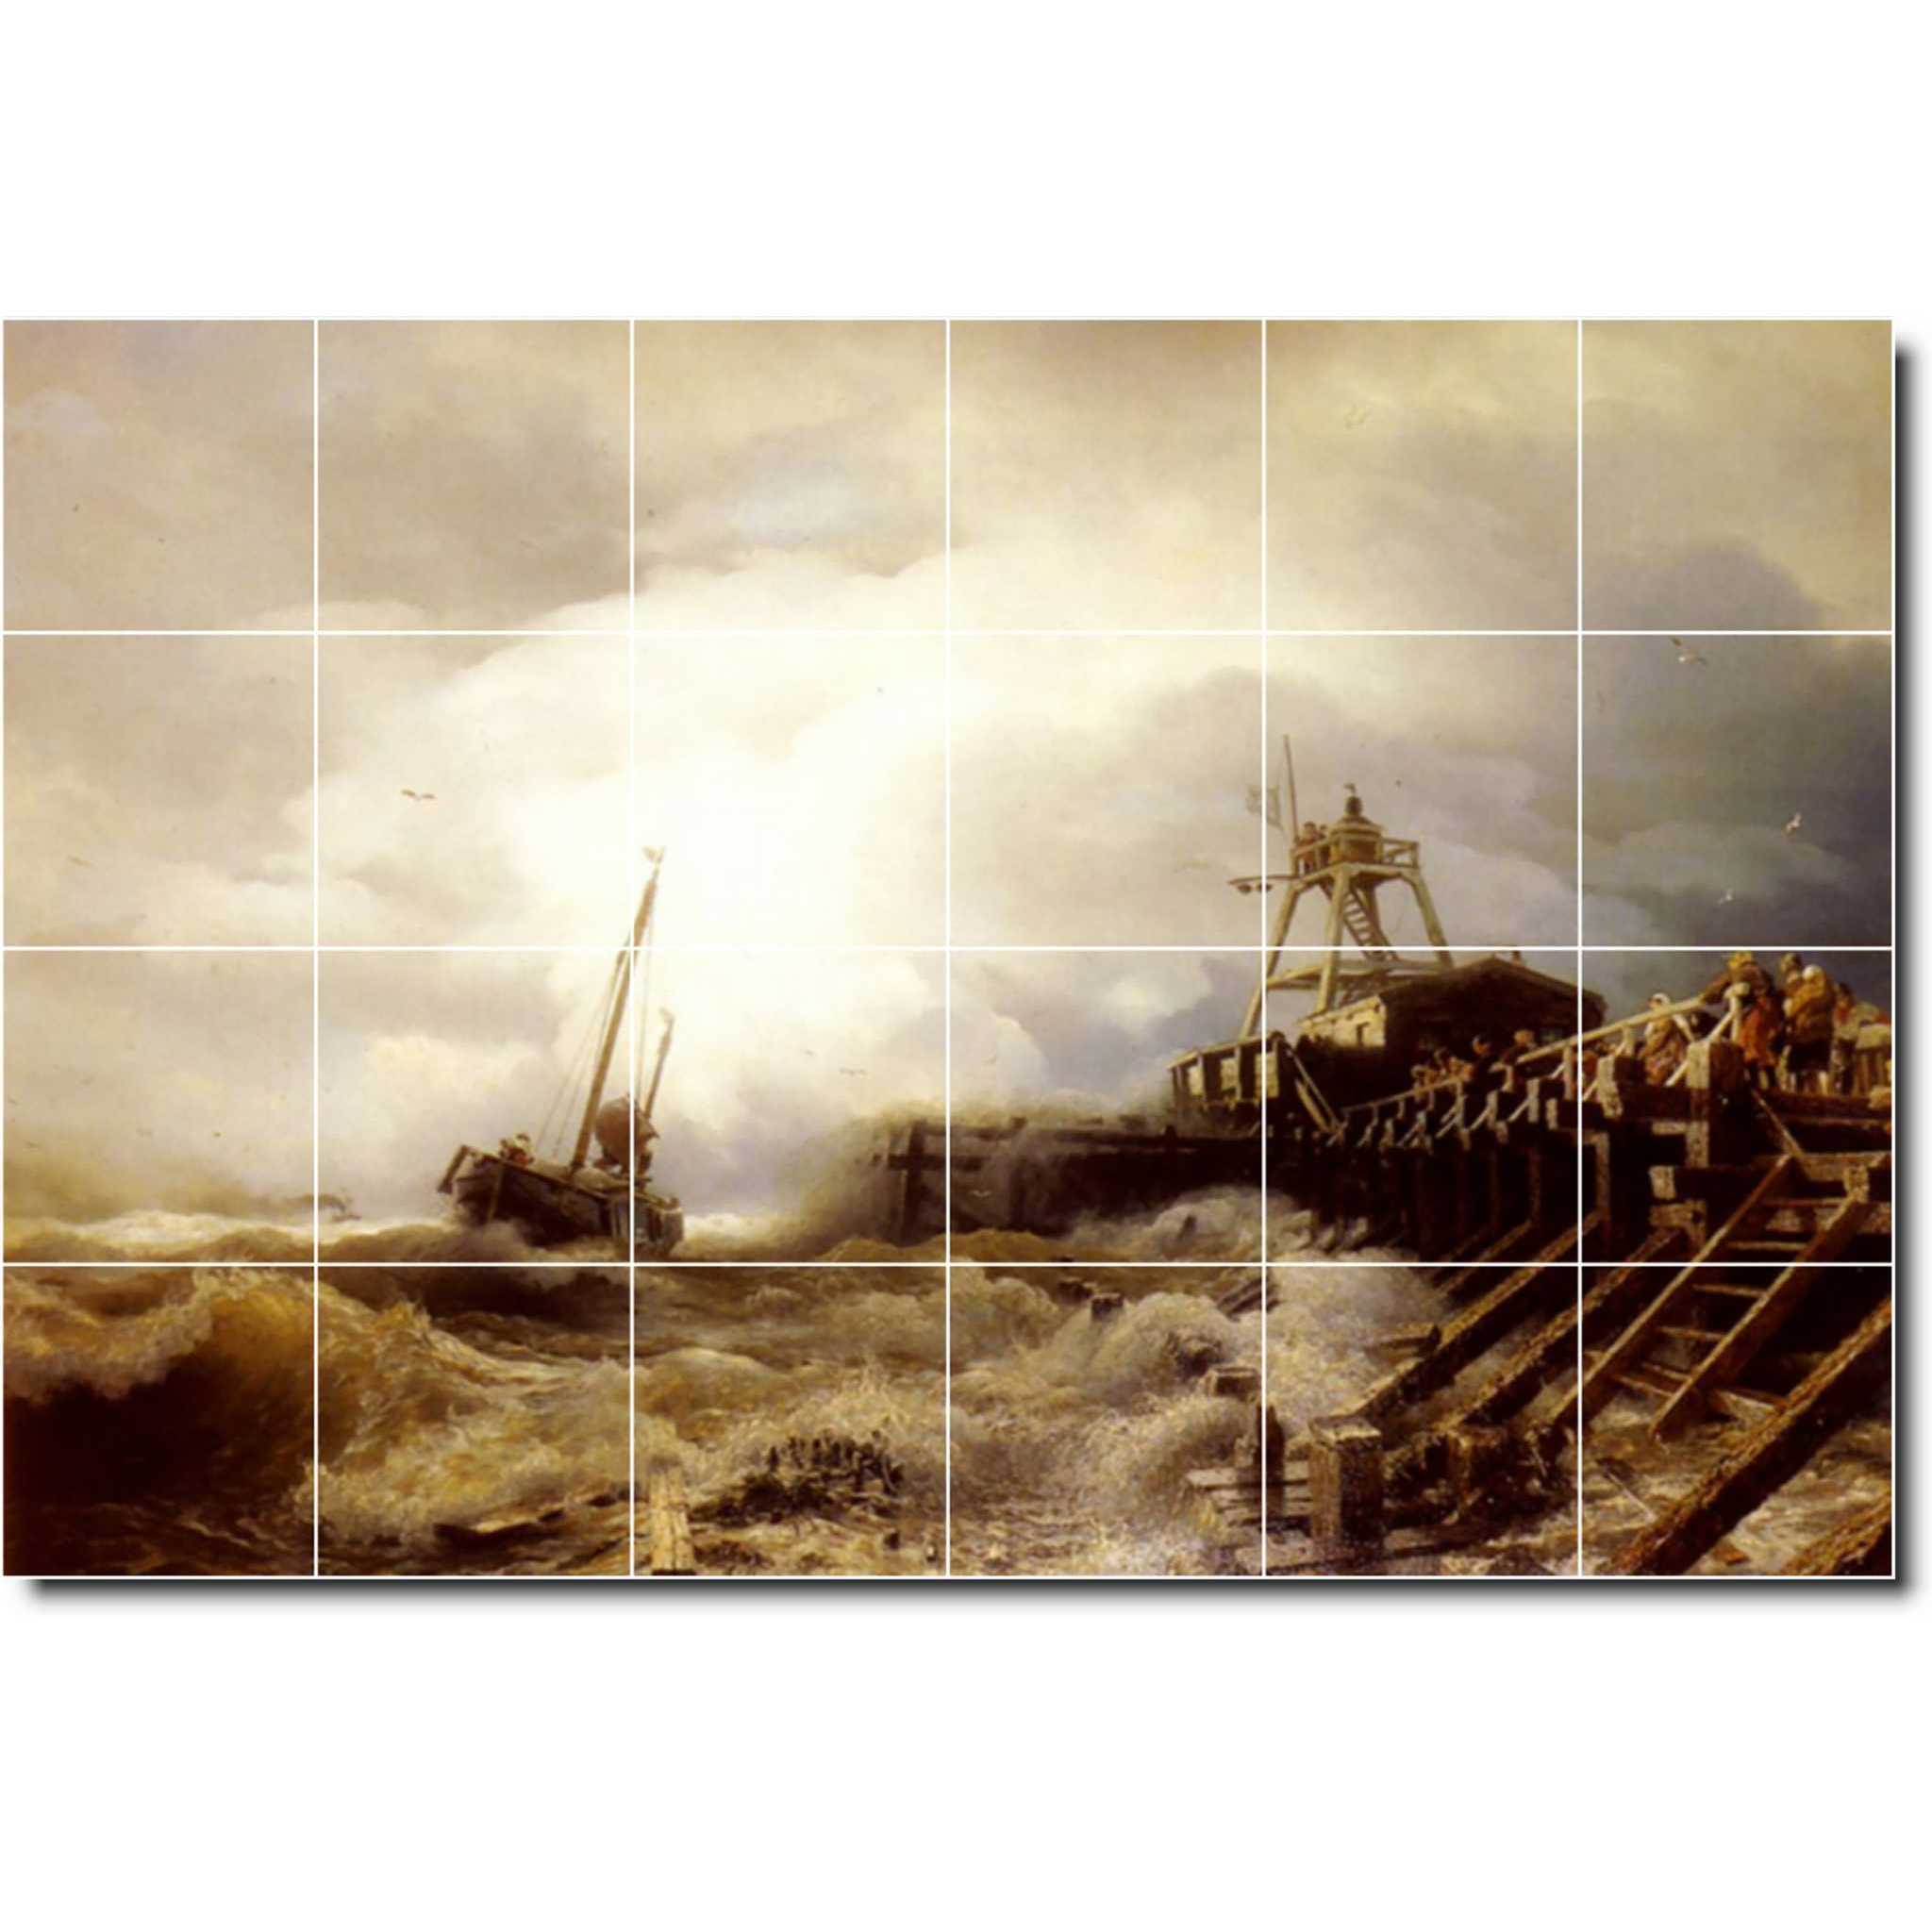 andreas achenbach waterfront painting ceramic tile mural p00001